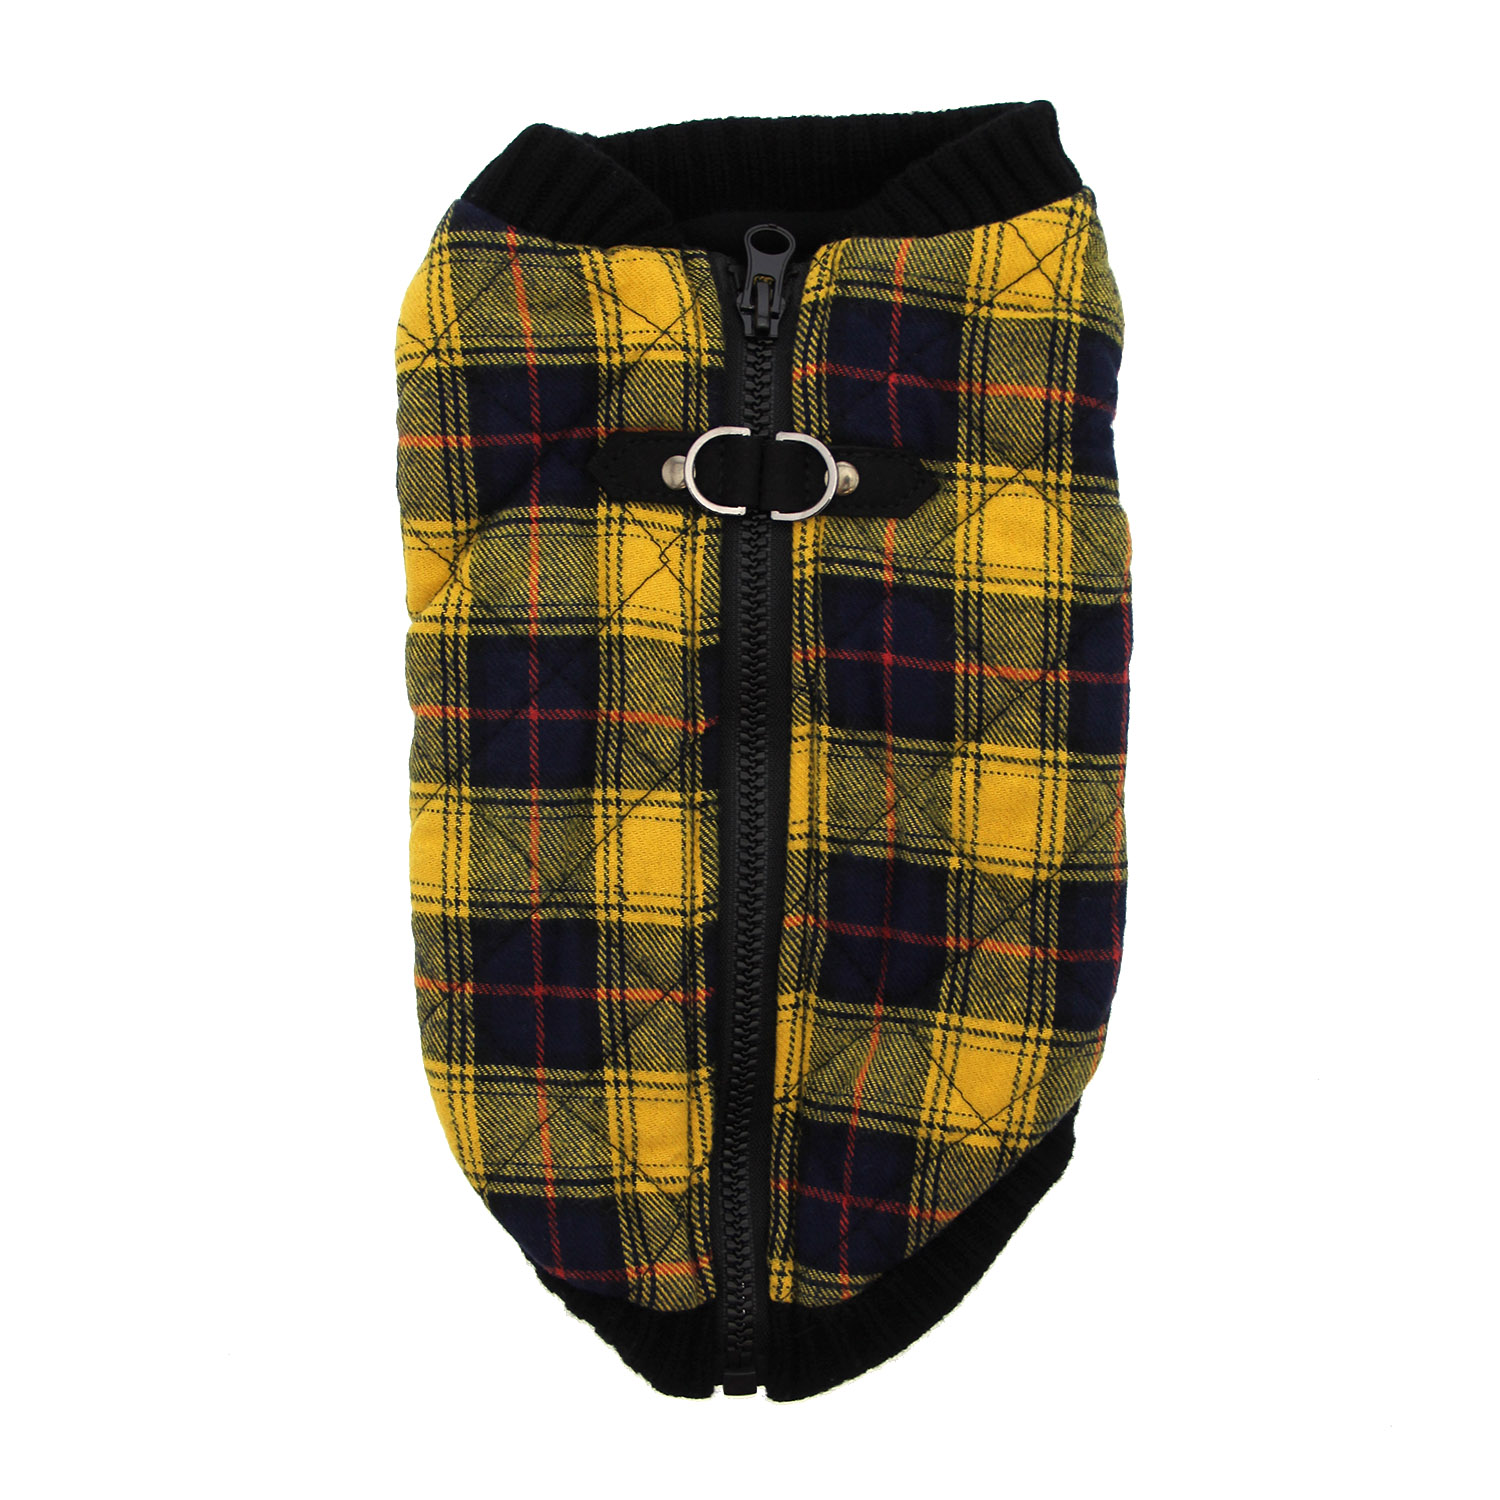 Fashion Bomber Check Dog Vest by Gooby - Yellow